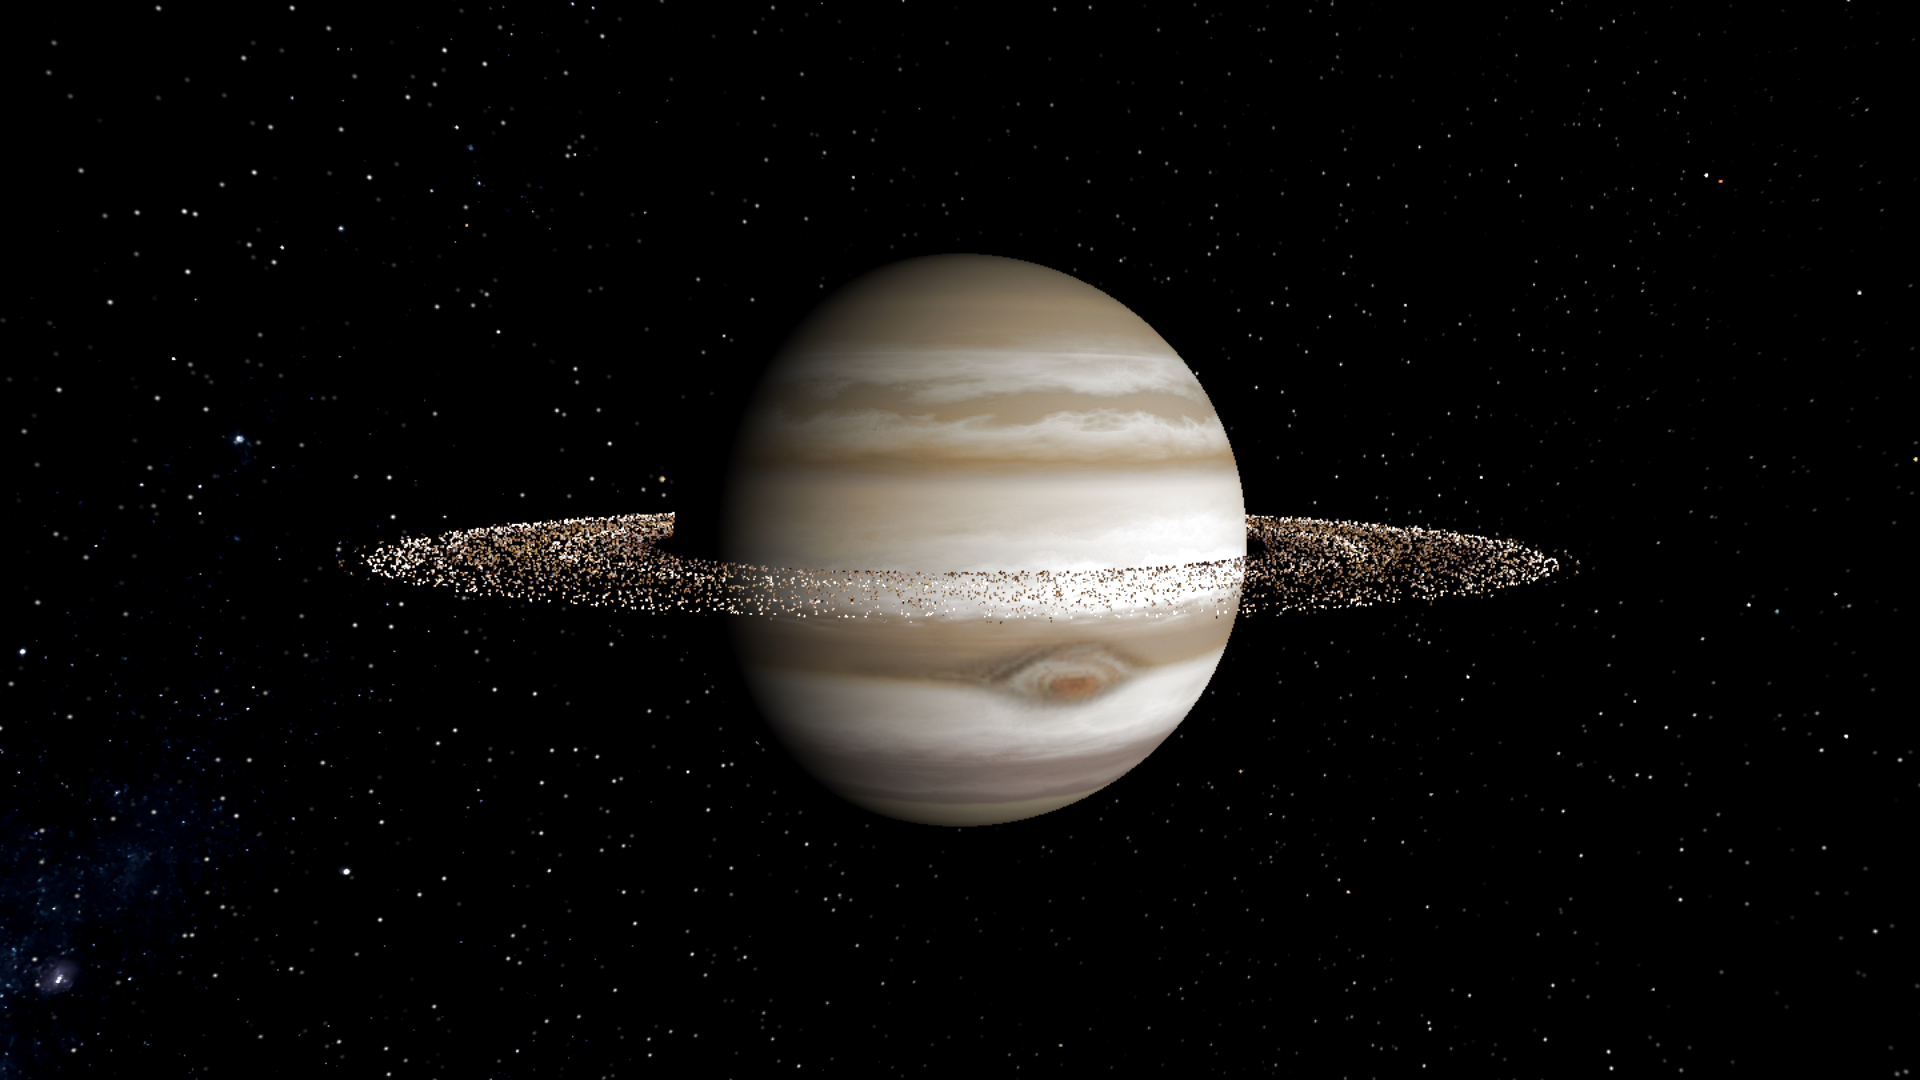 Jupiter formed dinky little rings, and there’s a convincing explanation why